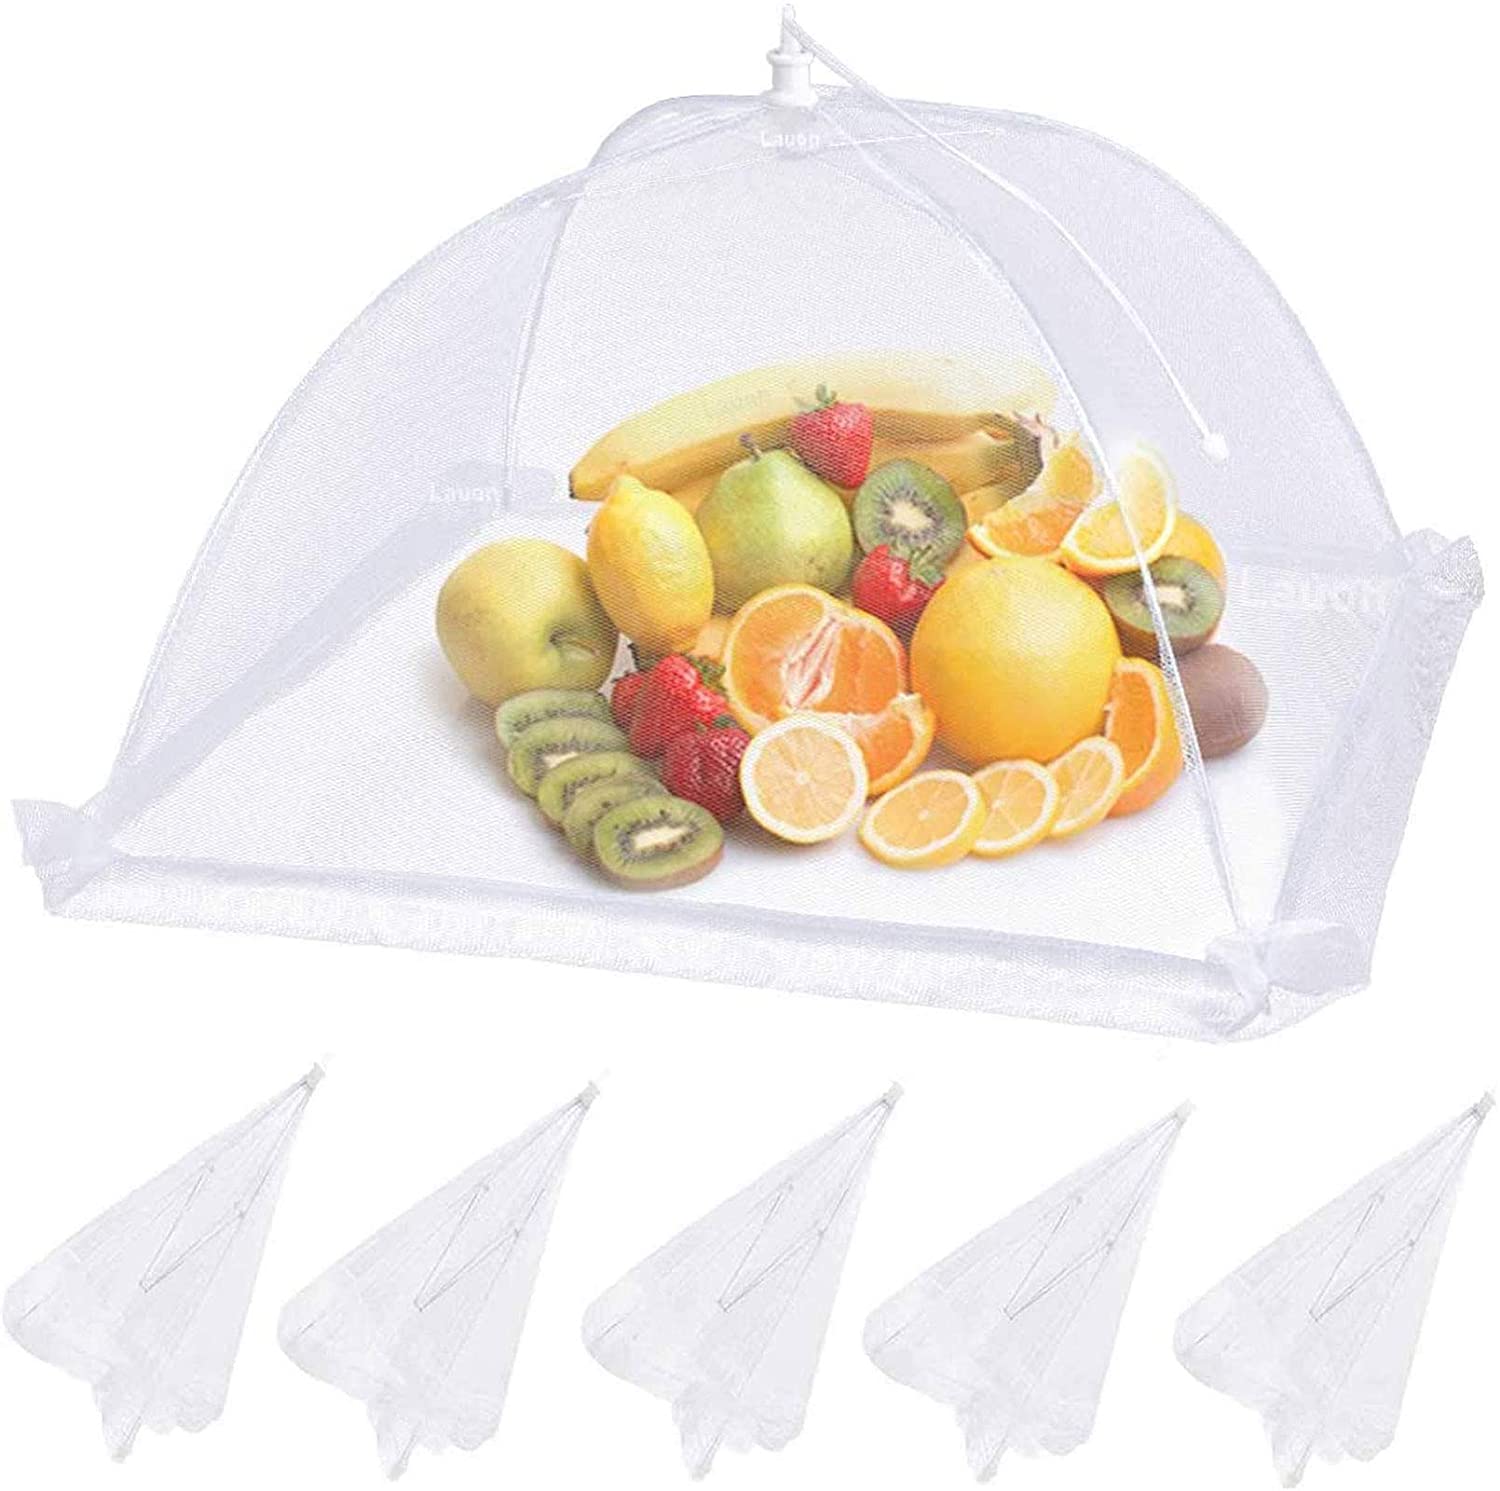 Lauon Folding Anti-Bug Outdoor Food Cover, 6-Pack